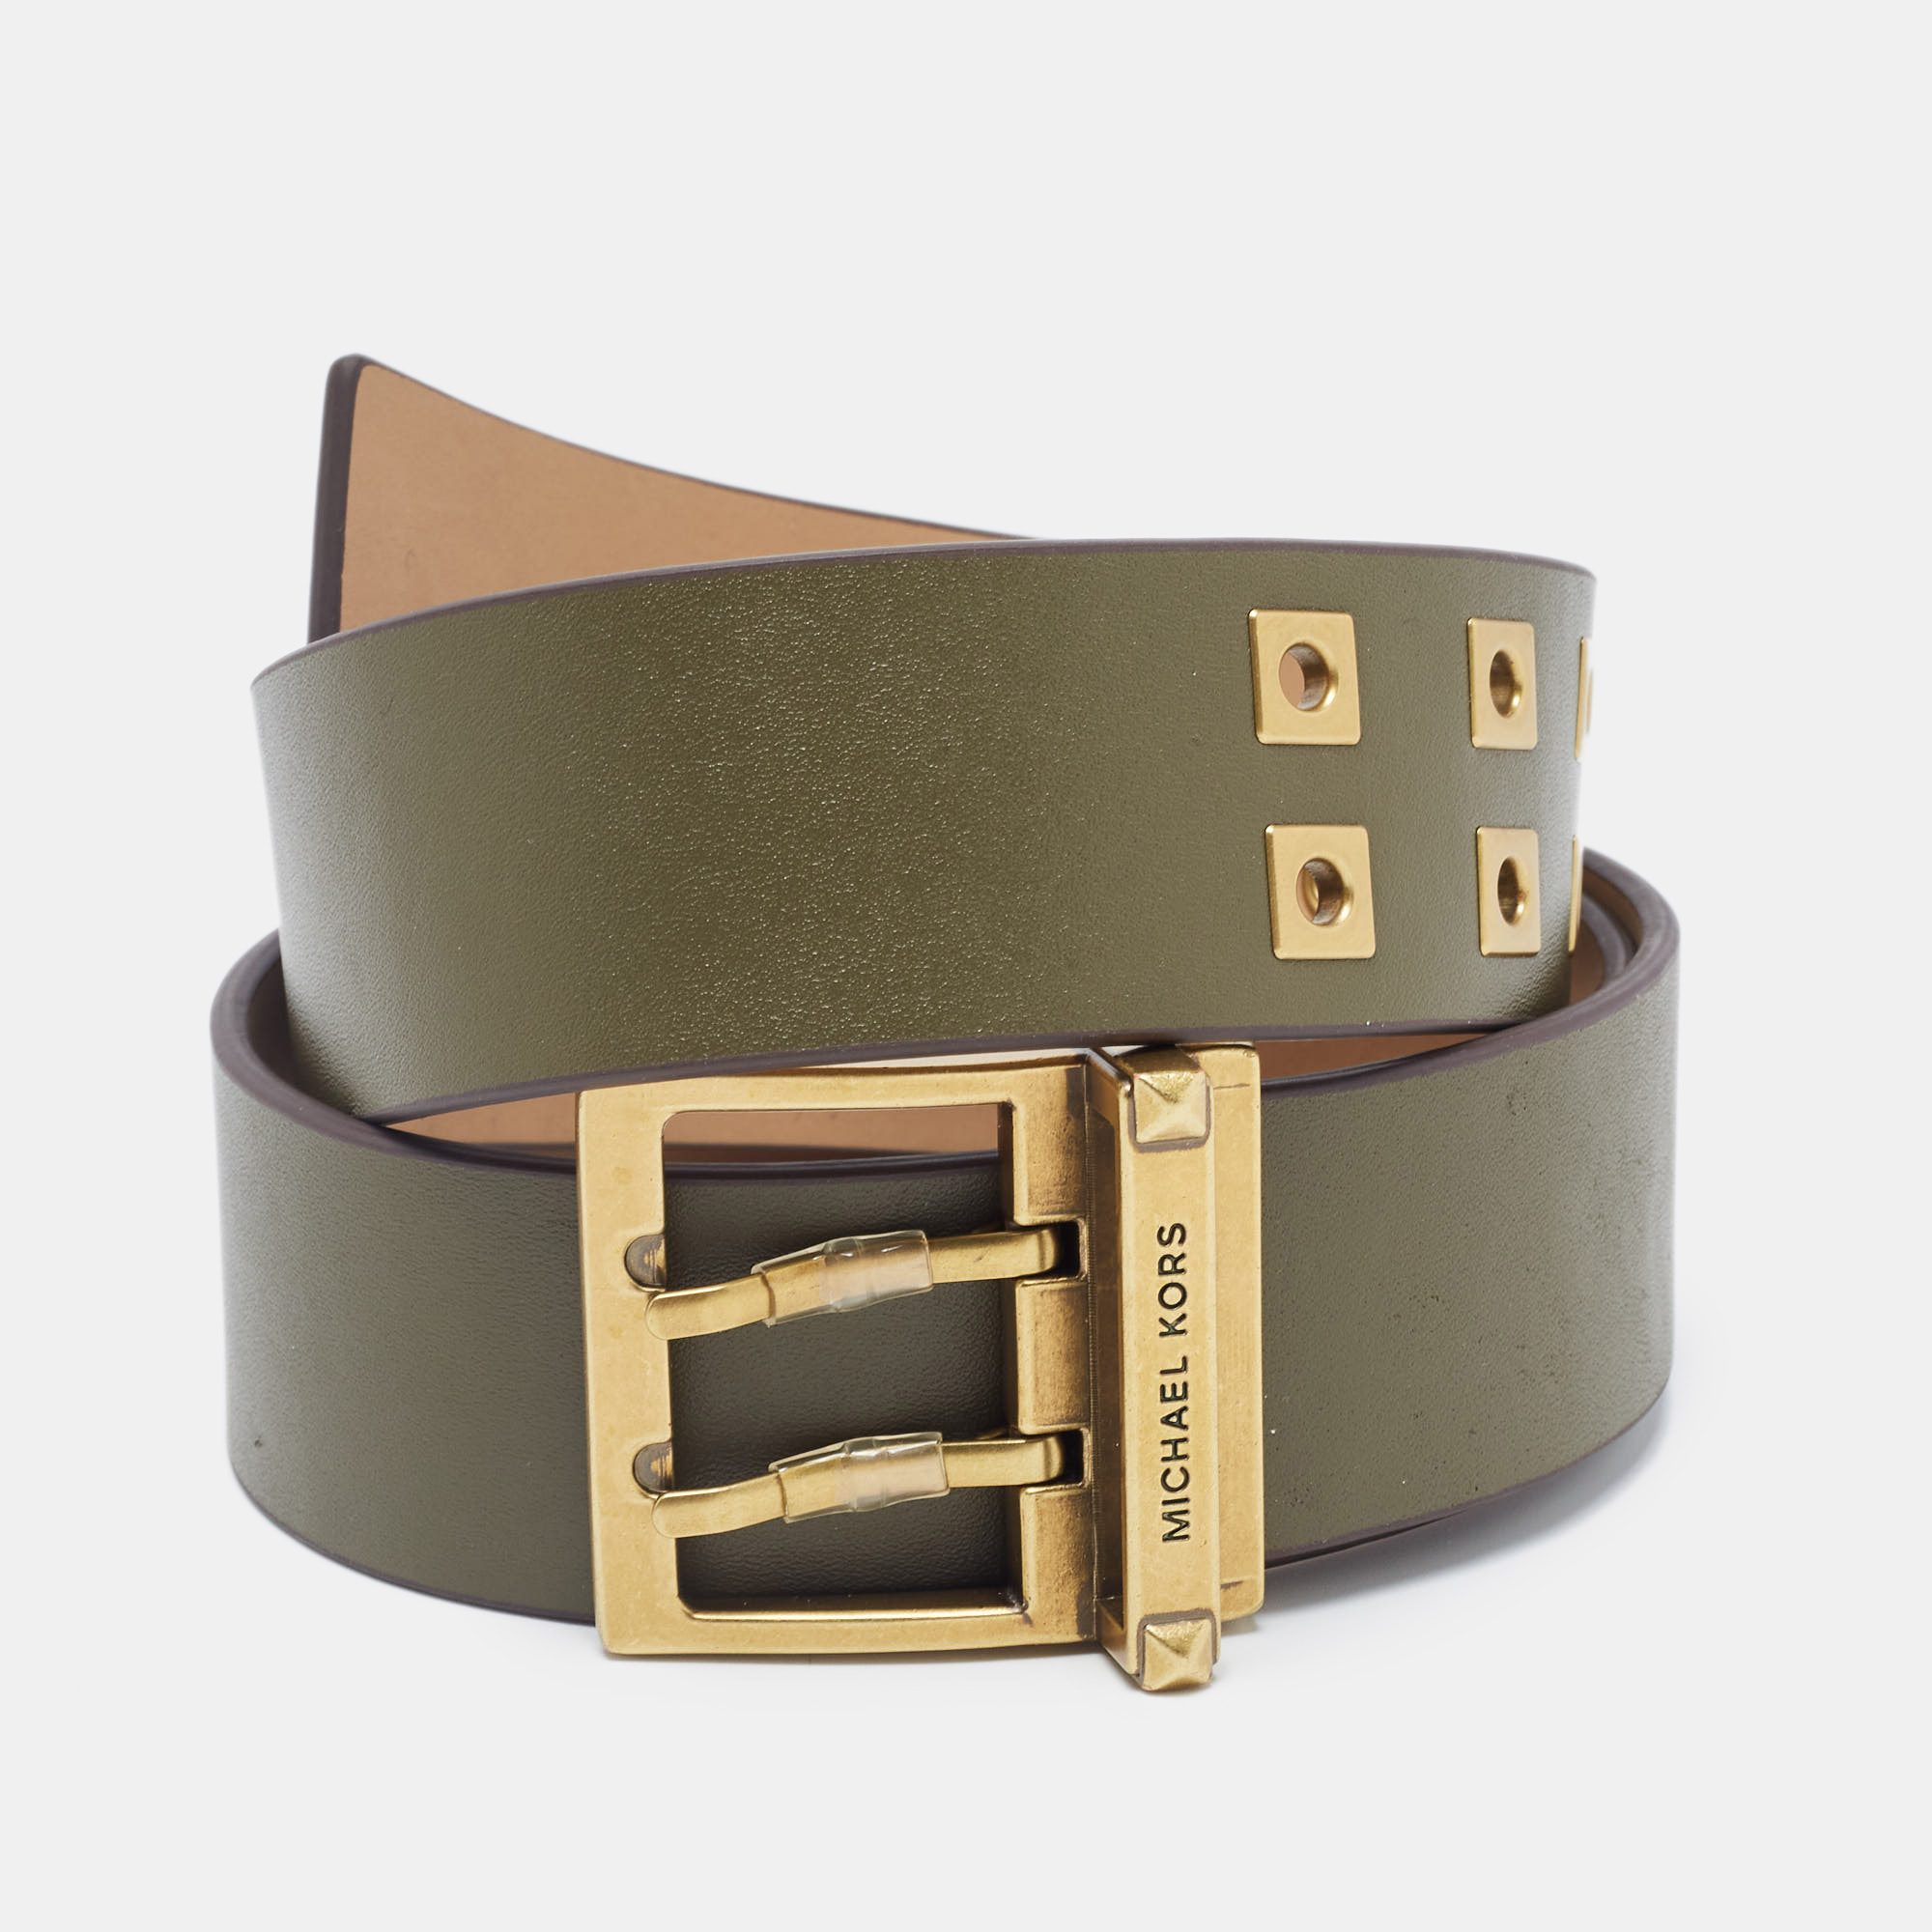 A classic add on to your collection of belts is this Michael Kors piece. Cut to a convenient length the belt has a smooth finish and a sturdy built. This wardrobe essential piece will continually complement your style.